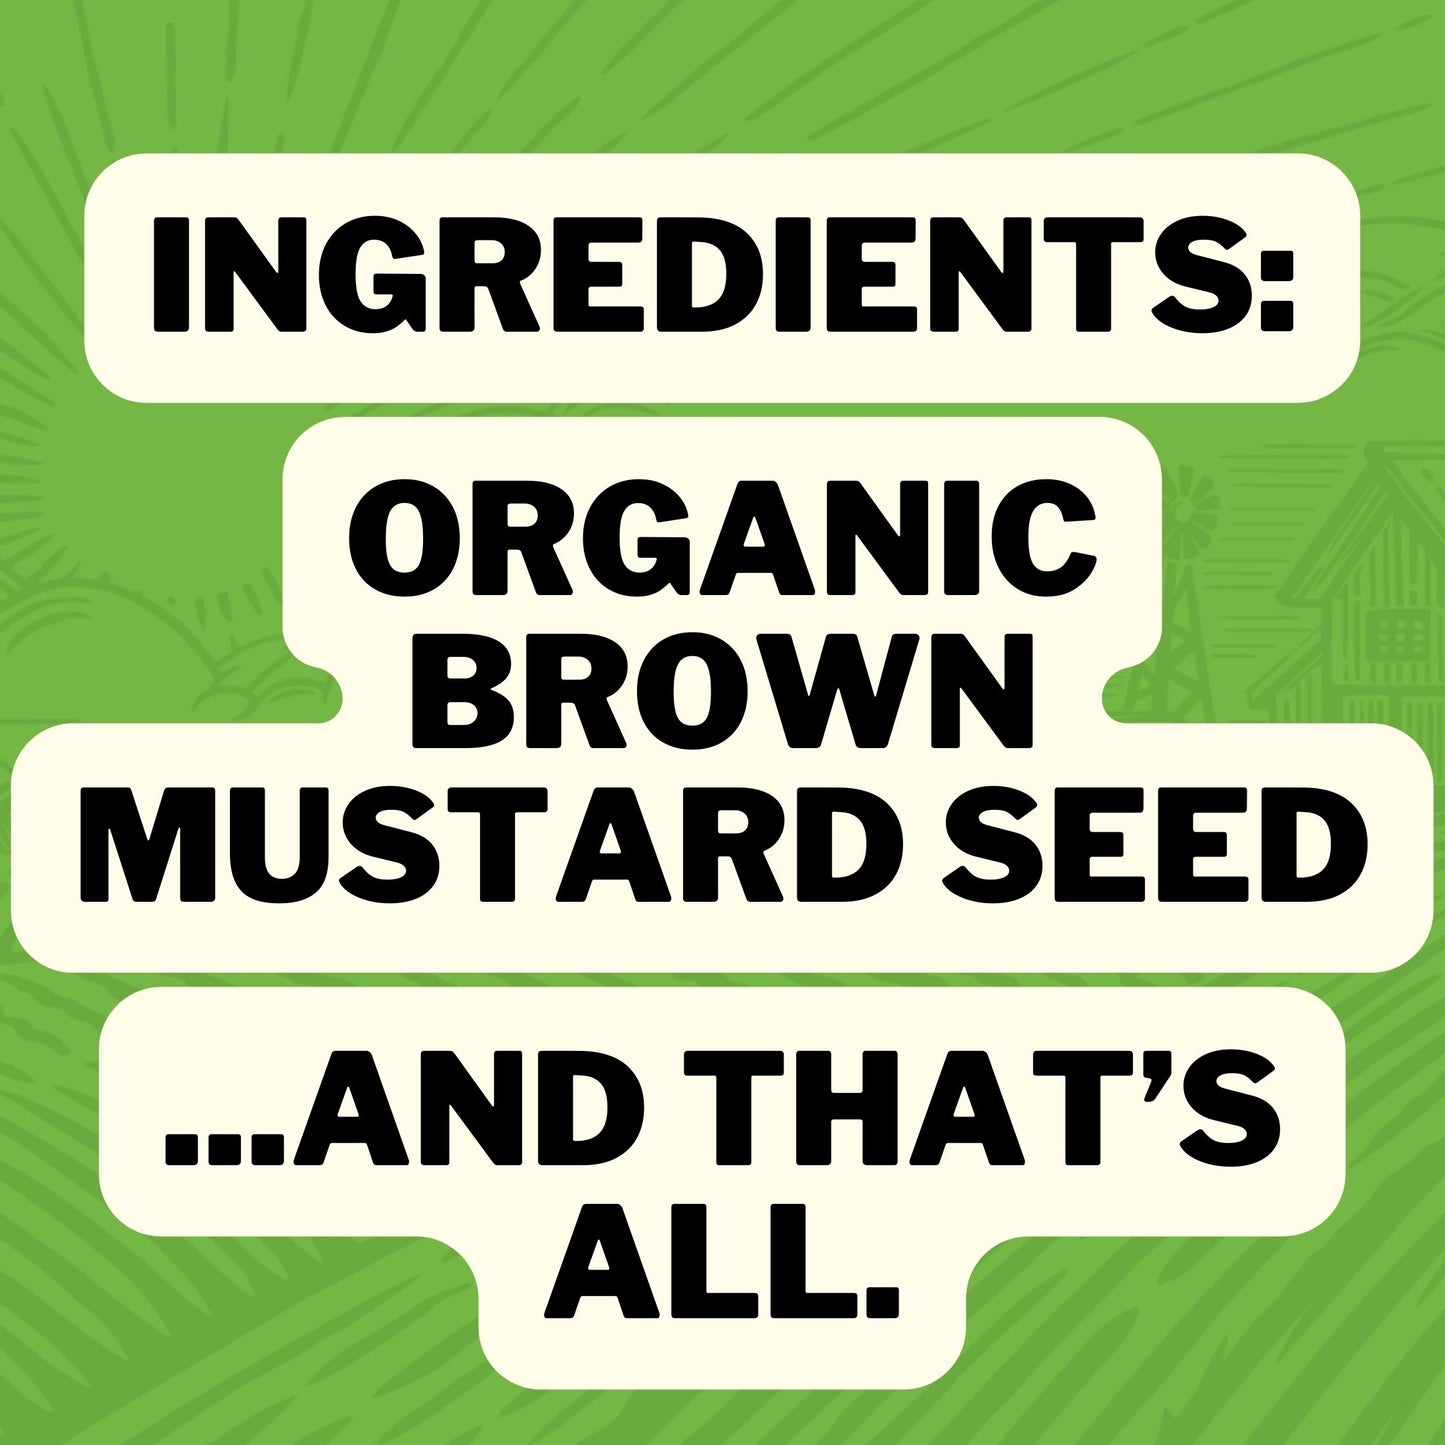 Ingredients : Organic Brown Mustard Seed... And that's all.